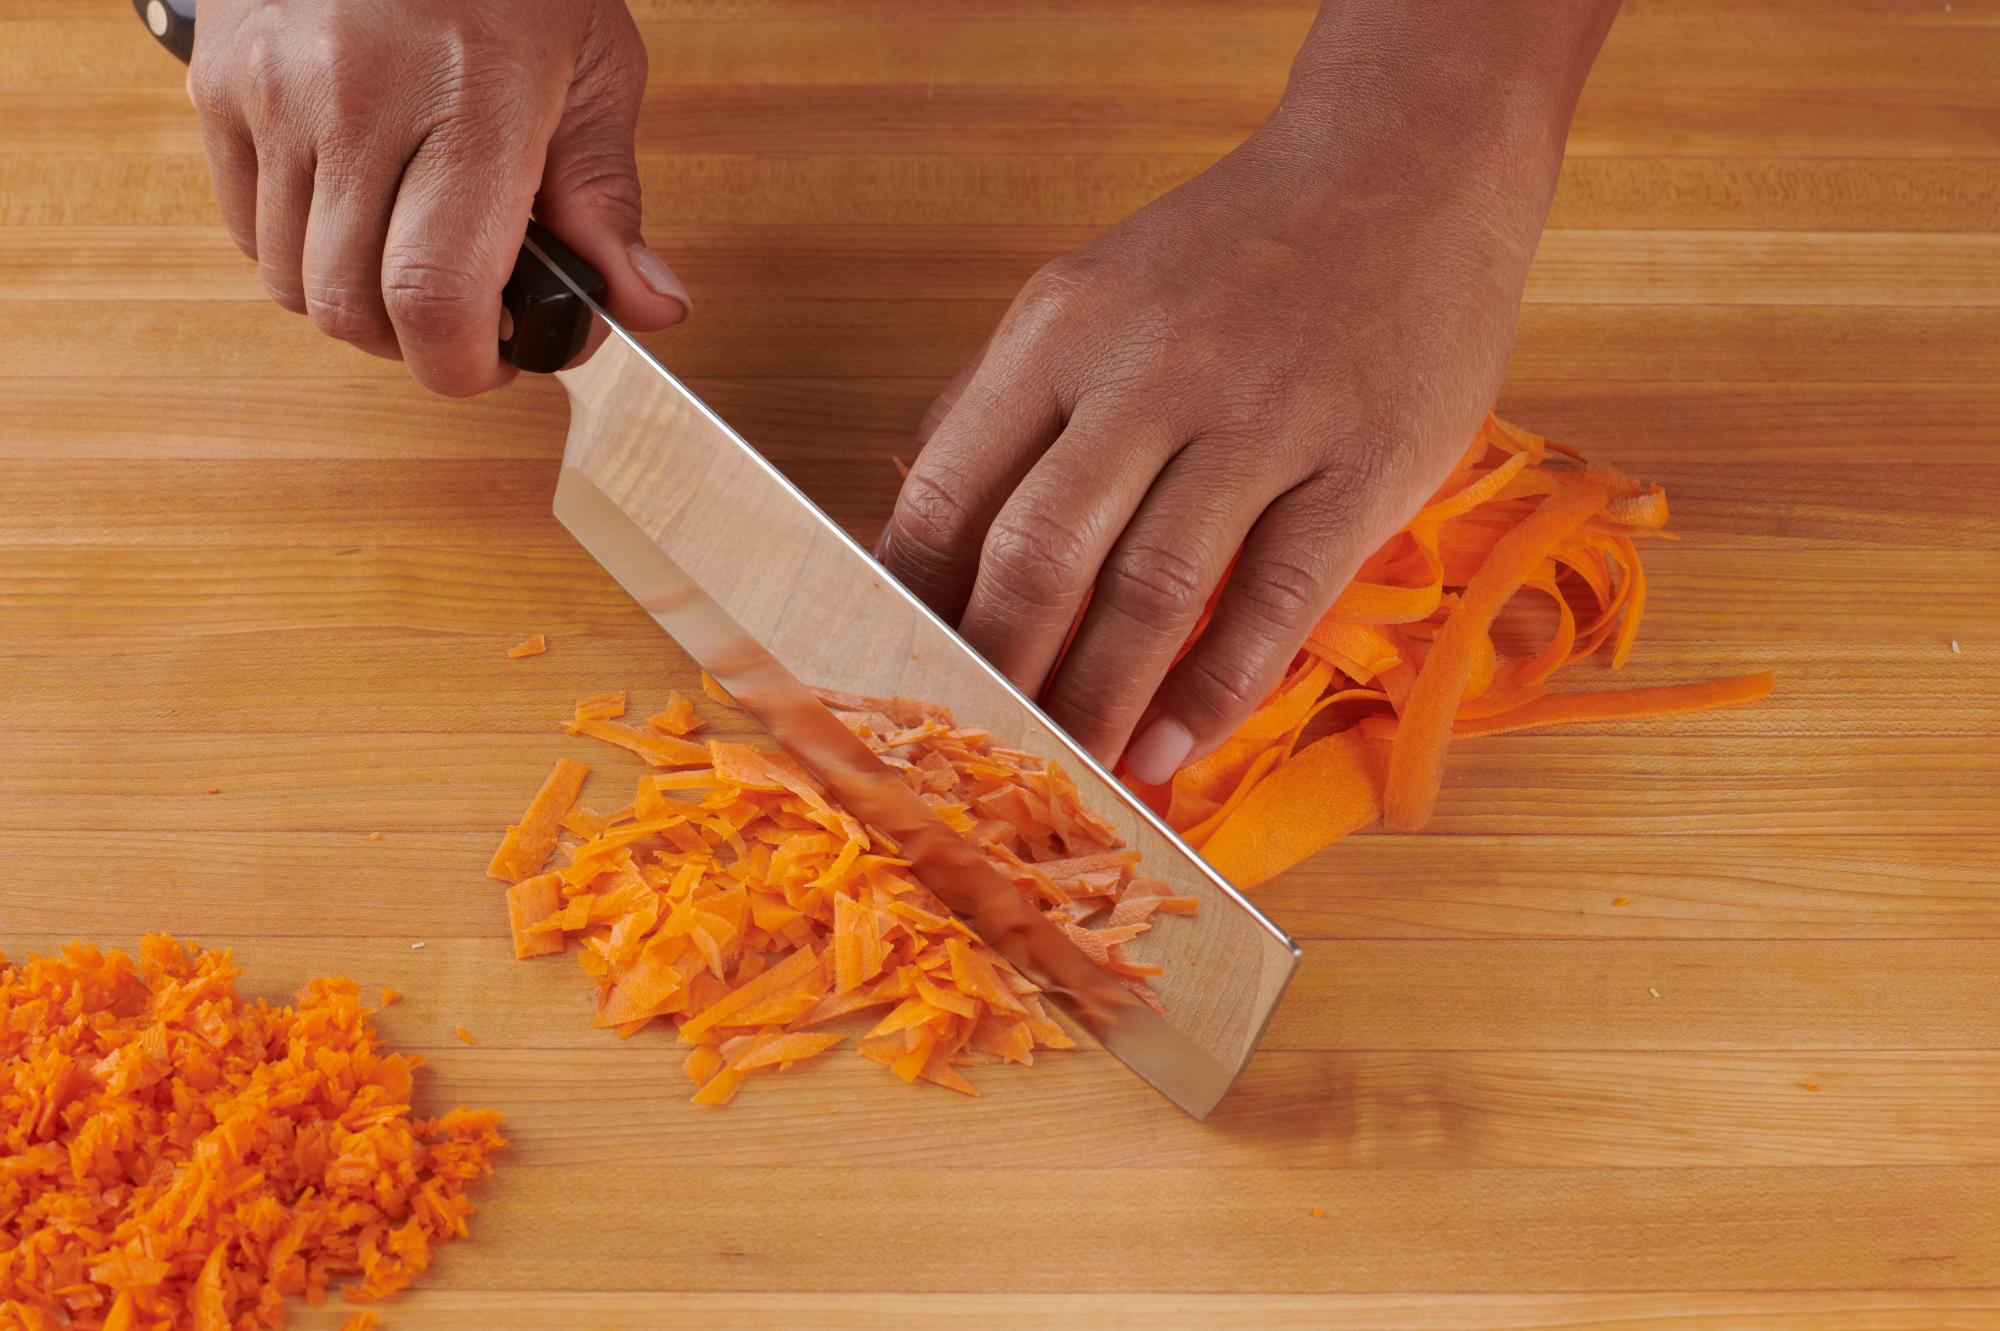 Chopping carrots with a Vegetable Knife.